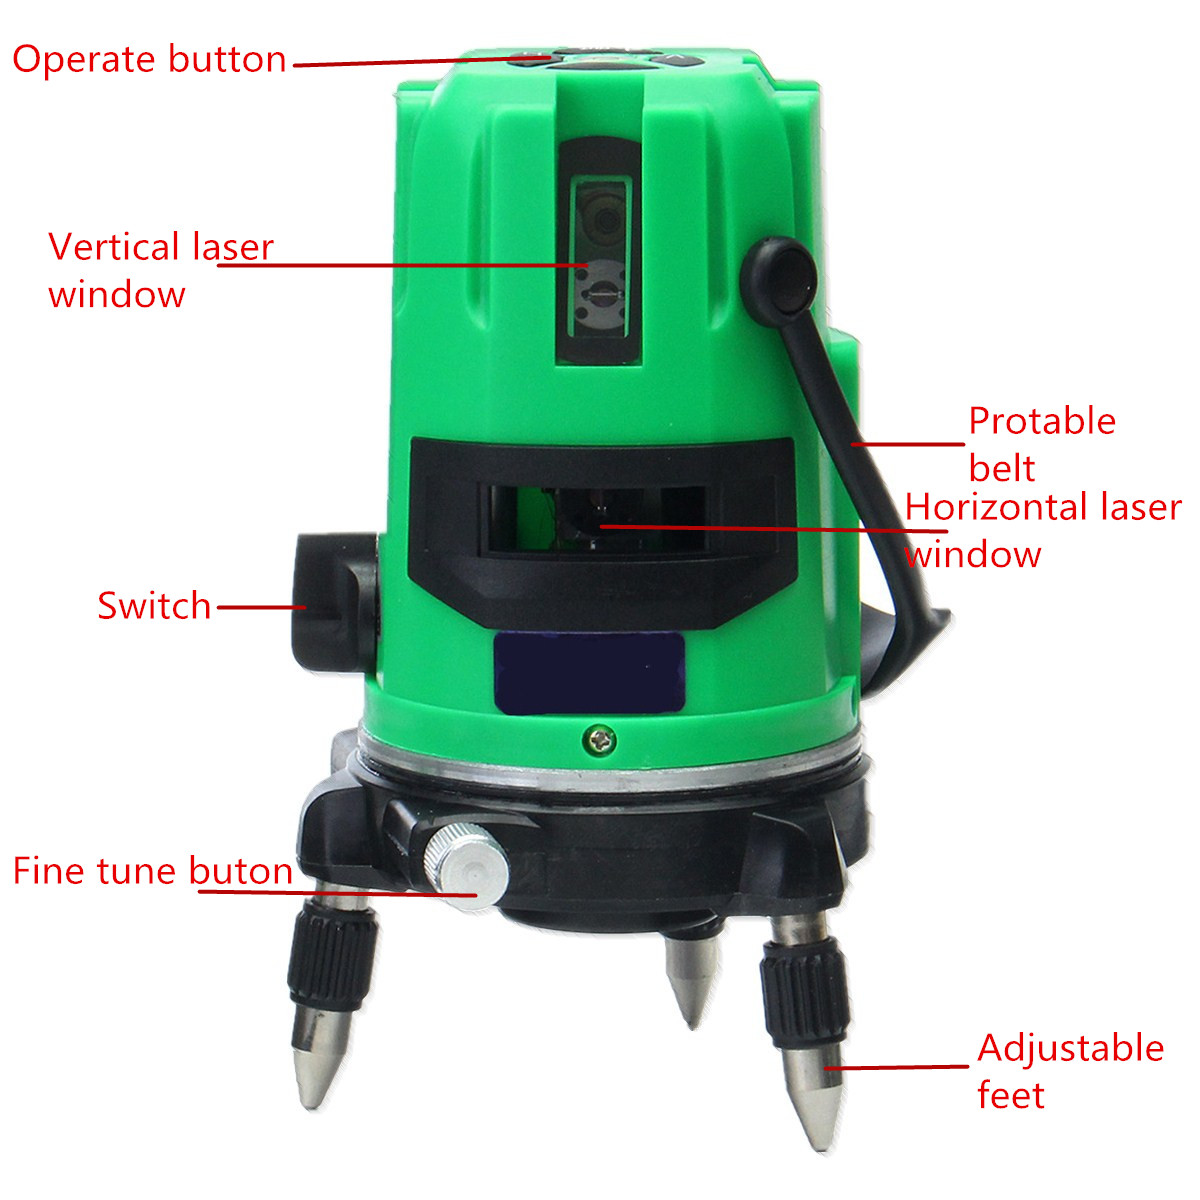 Green-2-Line-2-Points-Laser-Level-360-Rotary-Laser-Line-Self-Leveling-with-Tripod-1166735-5